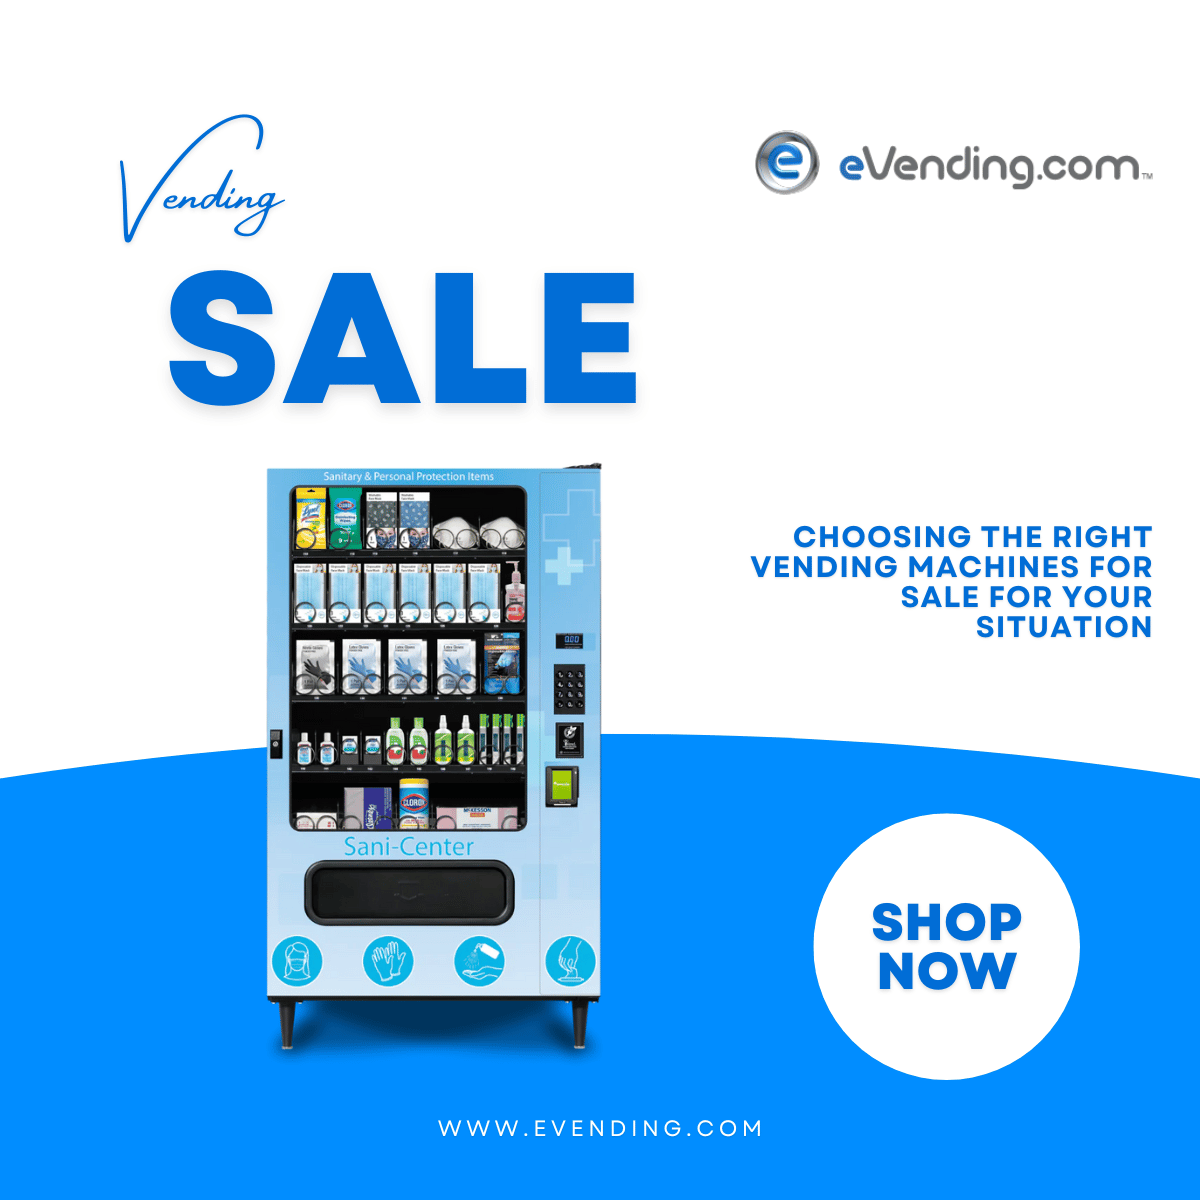 CHOOSING THE RIGHT VENDING MACHINES FOR SALE FOR YOUR SITUATION